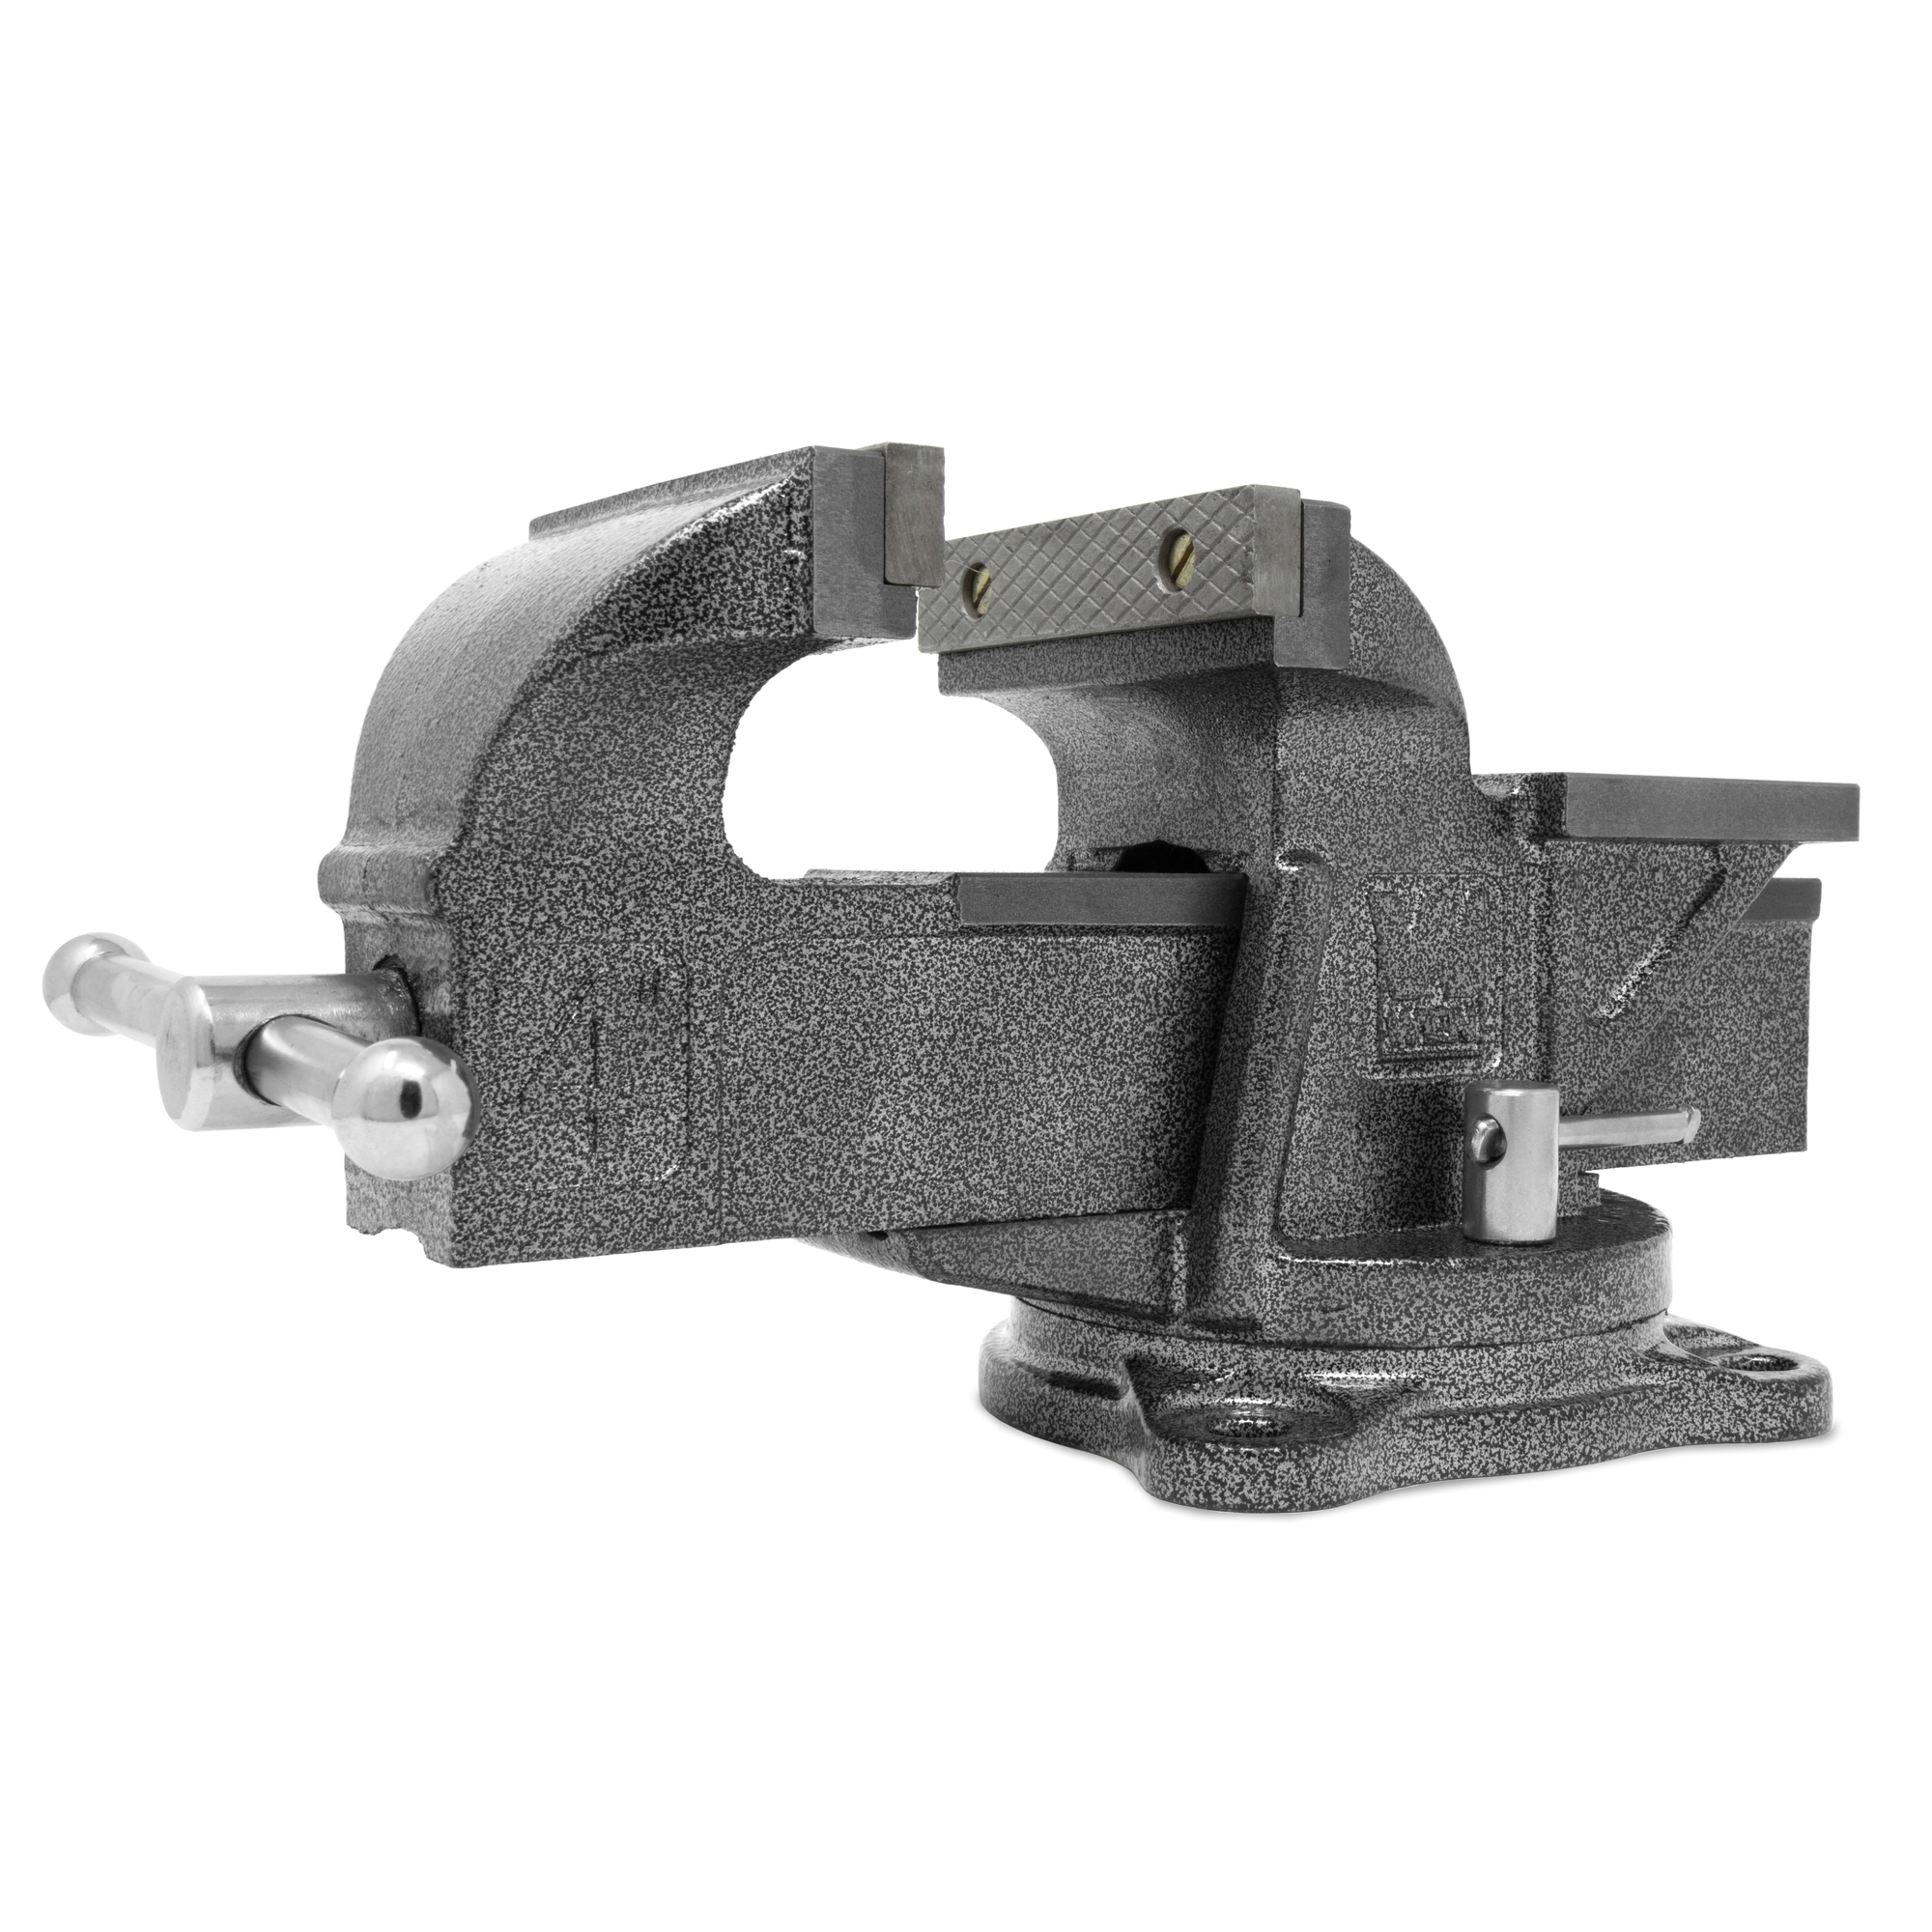 WEN, 4Inch Cast Iron Bench Vise with Swivel Base, Jaw Width 4 in, Jaw Capacity 5.13 in, Material Cast Iron, Model BV454